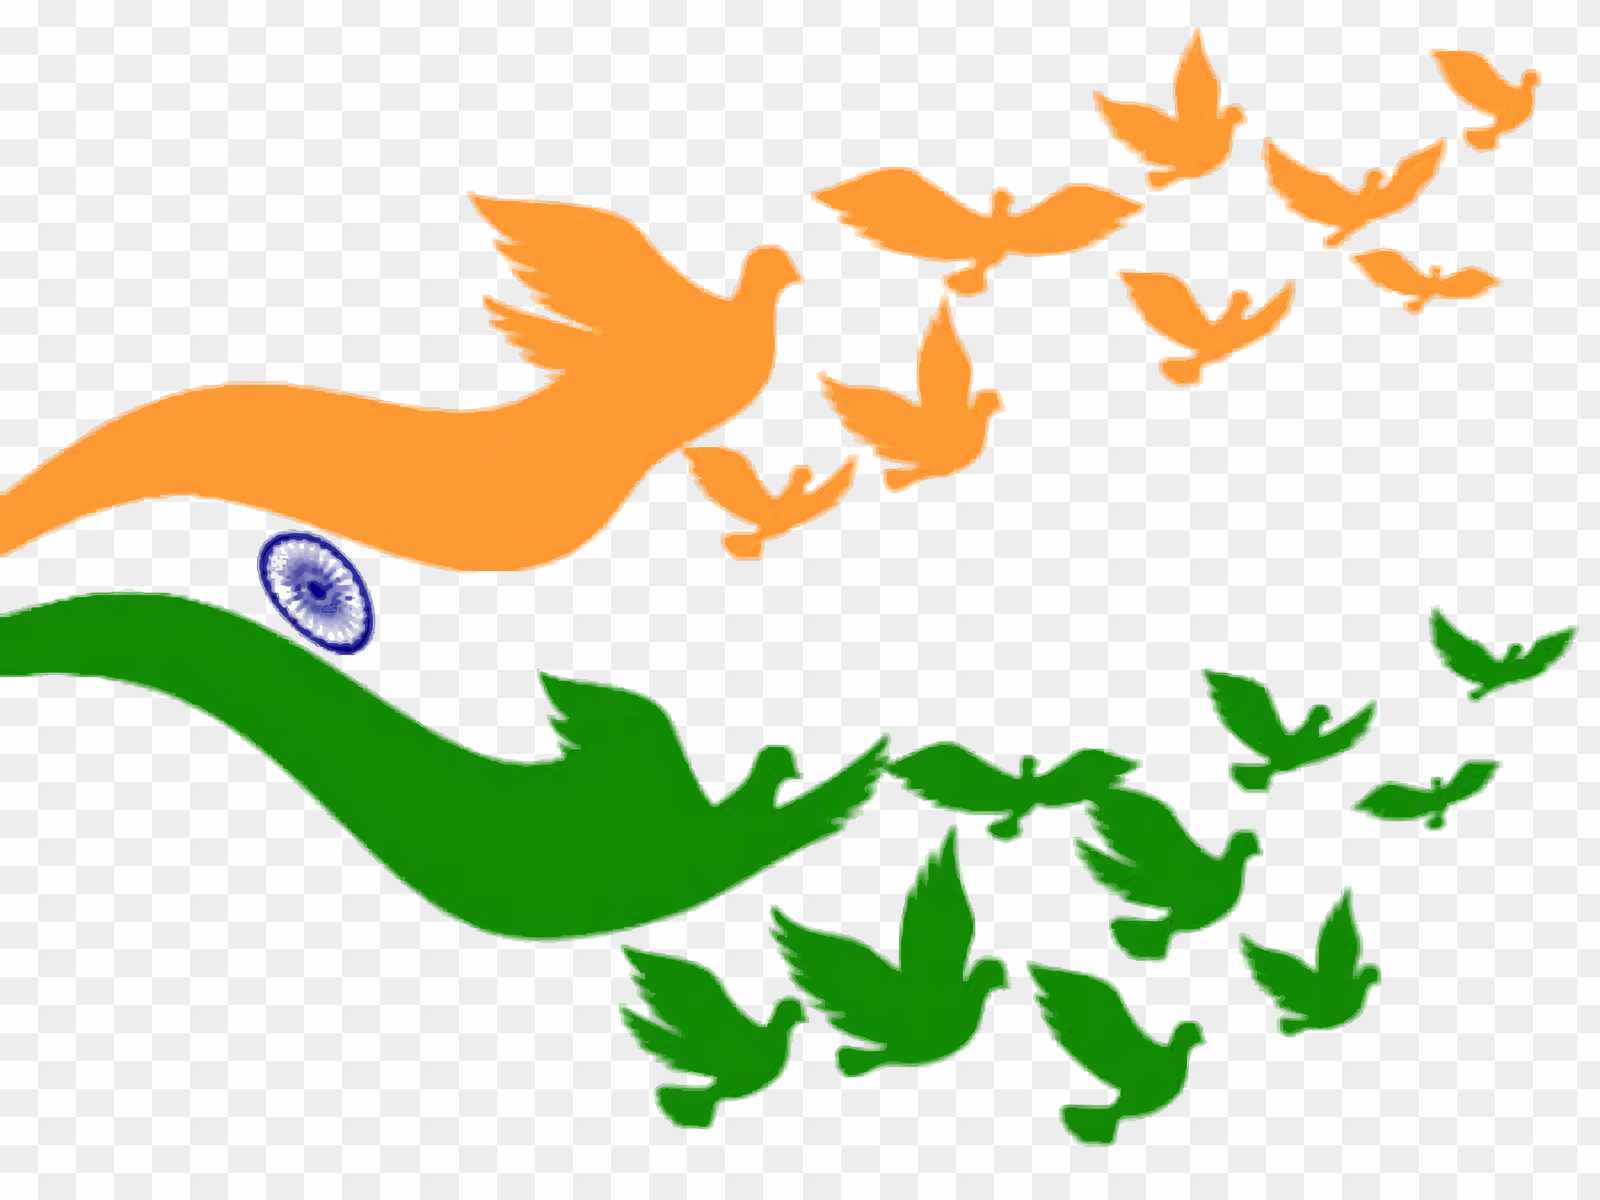 Indian flag editing PNG images